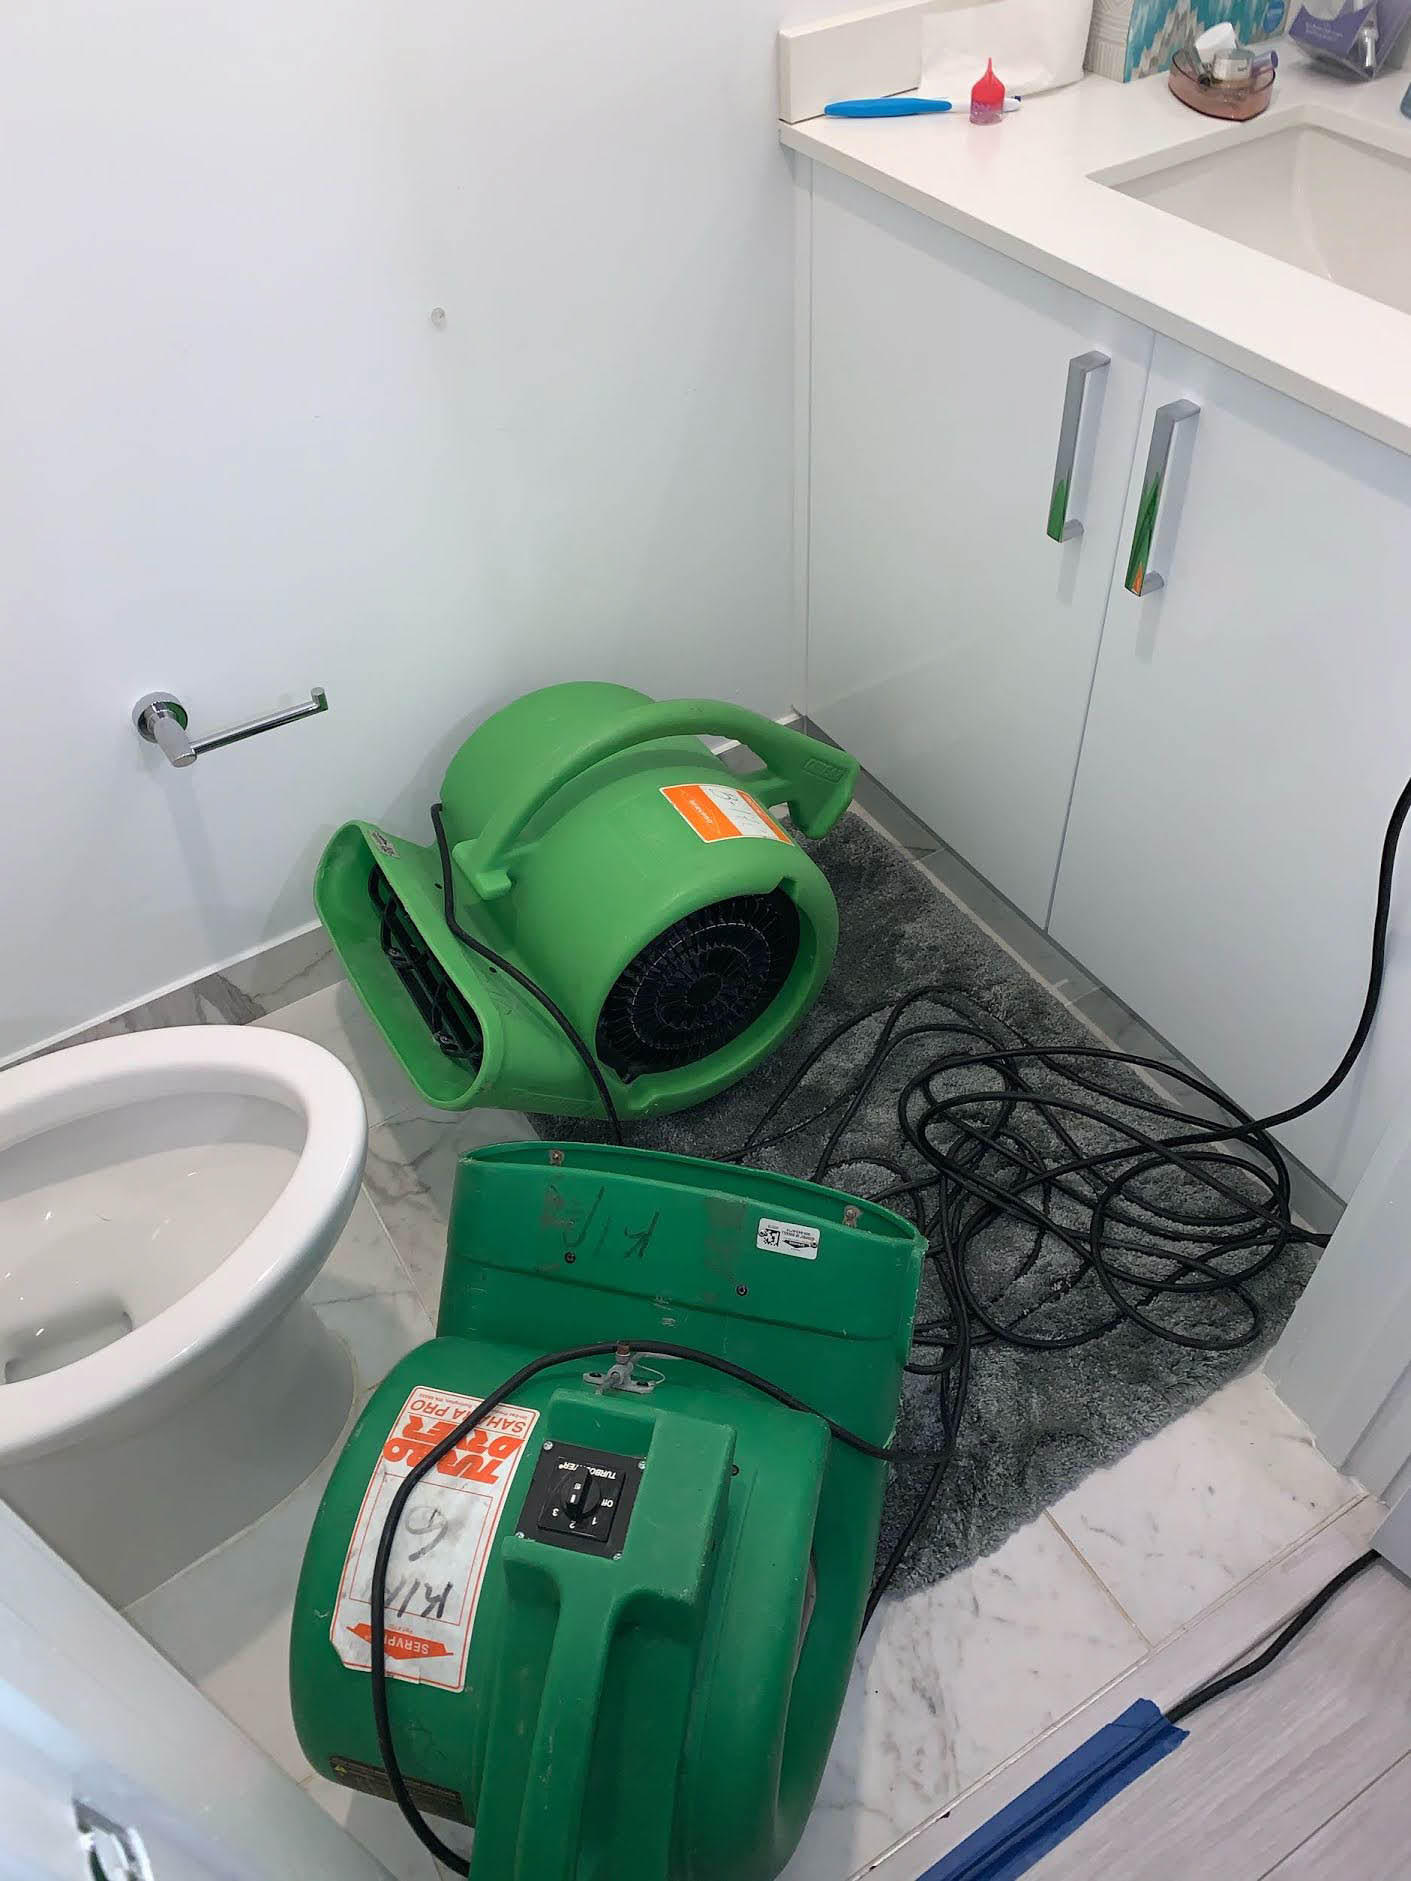 The best way to solve your leaking toilet is to call SERVPRO of Brickell